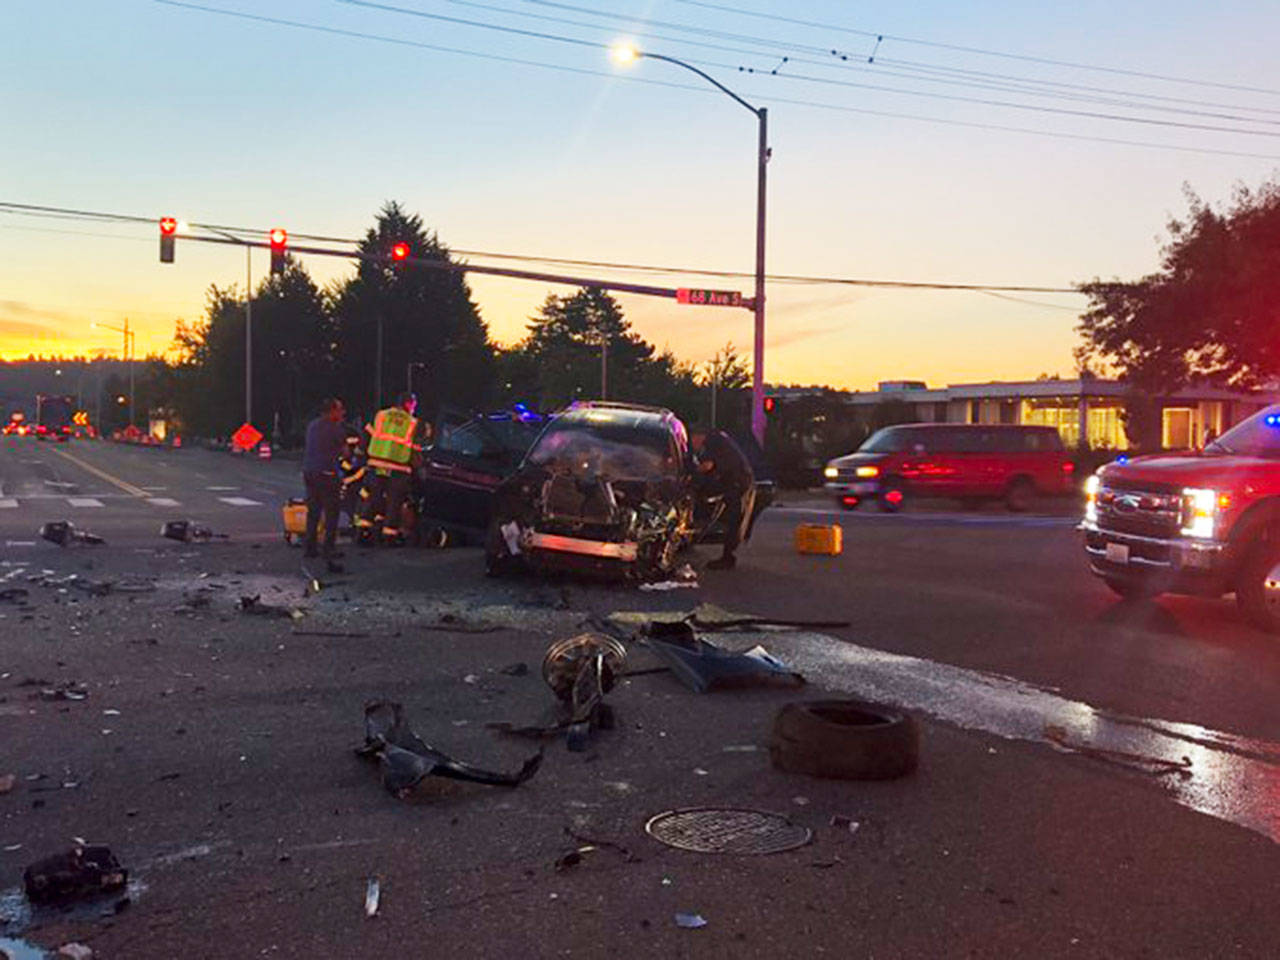 A SUV collided with a semi at about 6 a.m. Wednesday, Sept. 2 at the intersection of 68th Avenue South and South 228th Street. COURTESY PHOTO, Puget Sound Fire